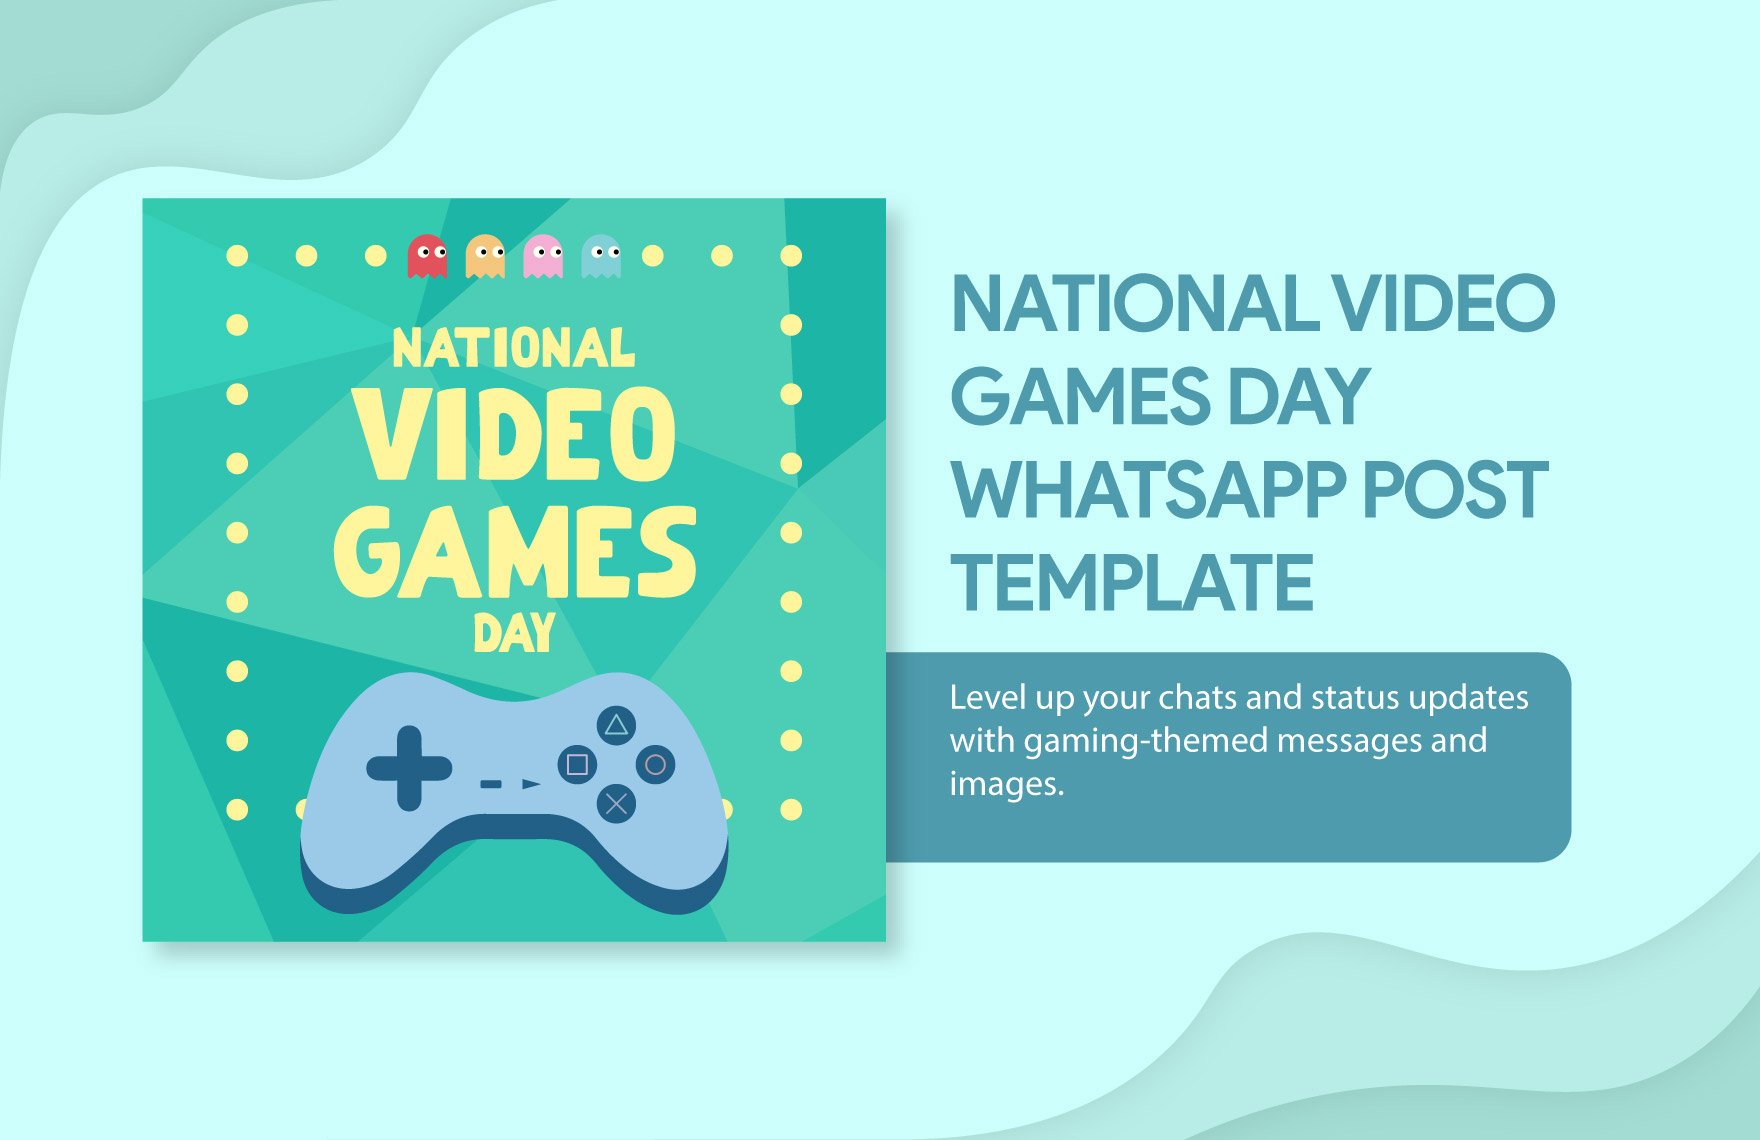 Free National Video Games Day WhatsApp Post Template in Illustrator, PSD, PNG